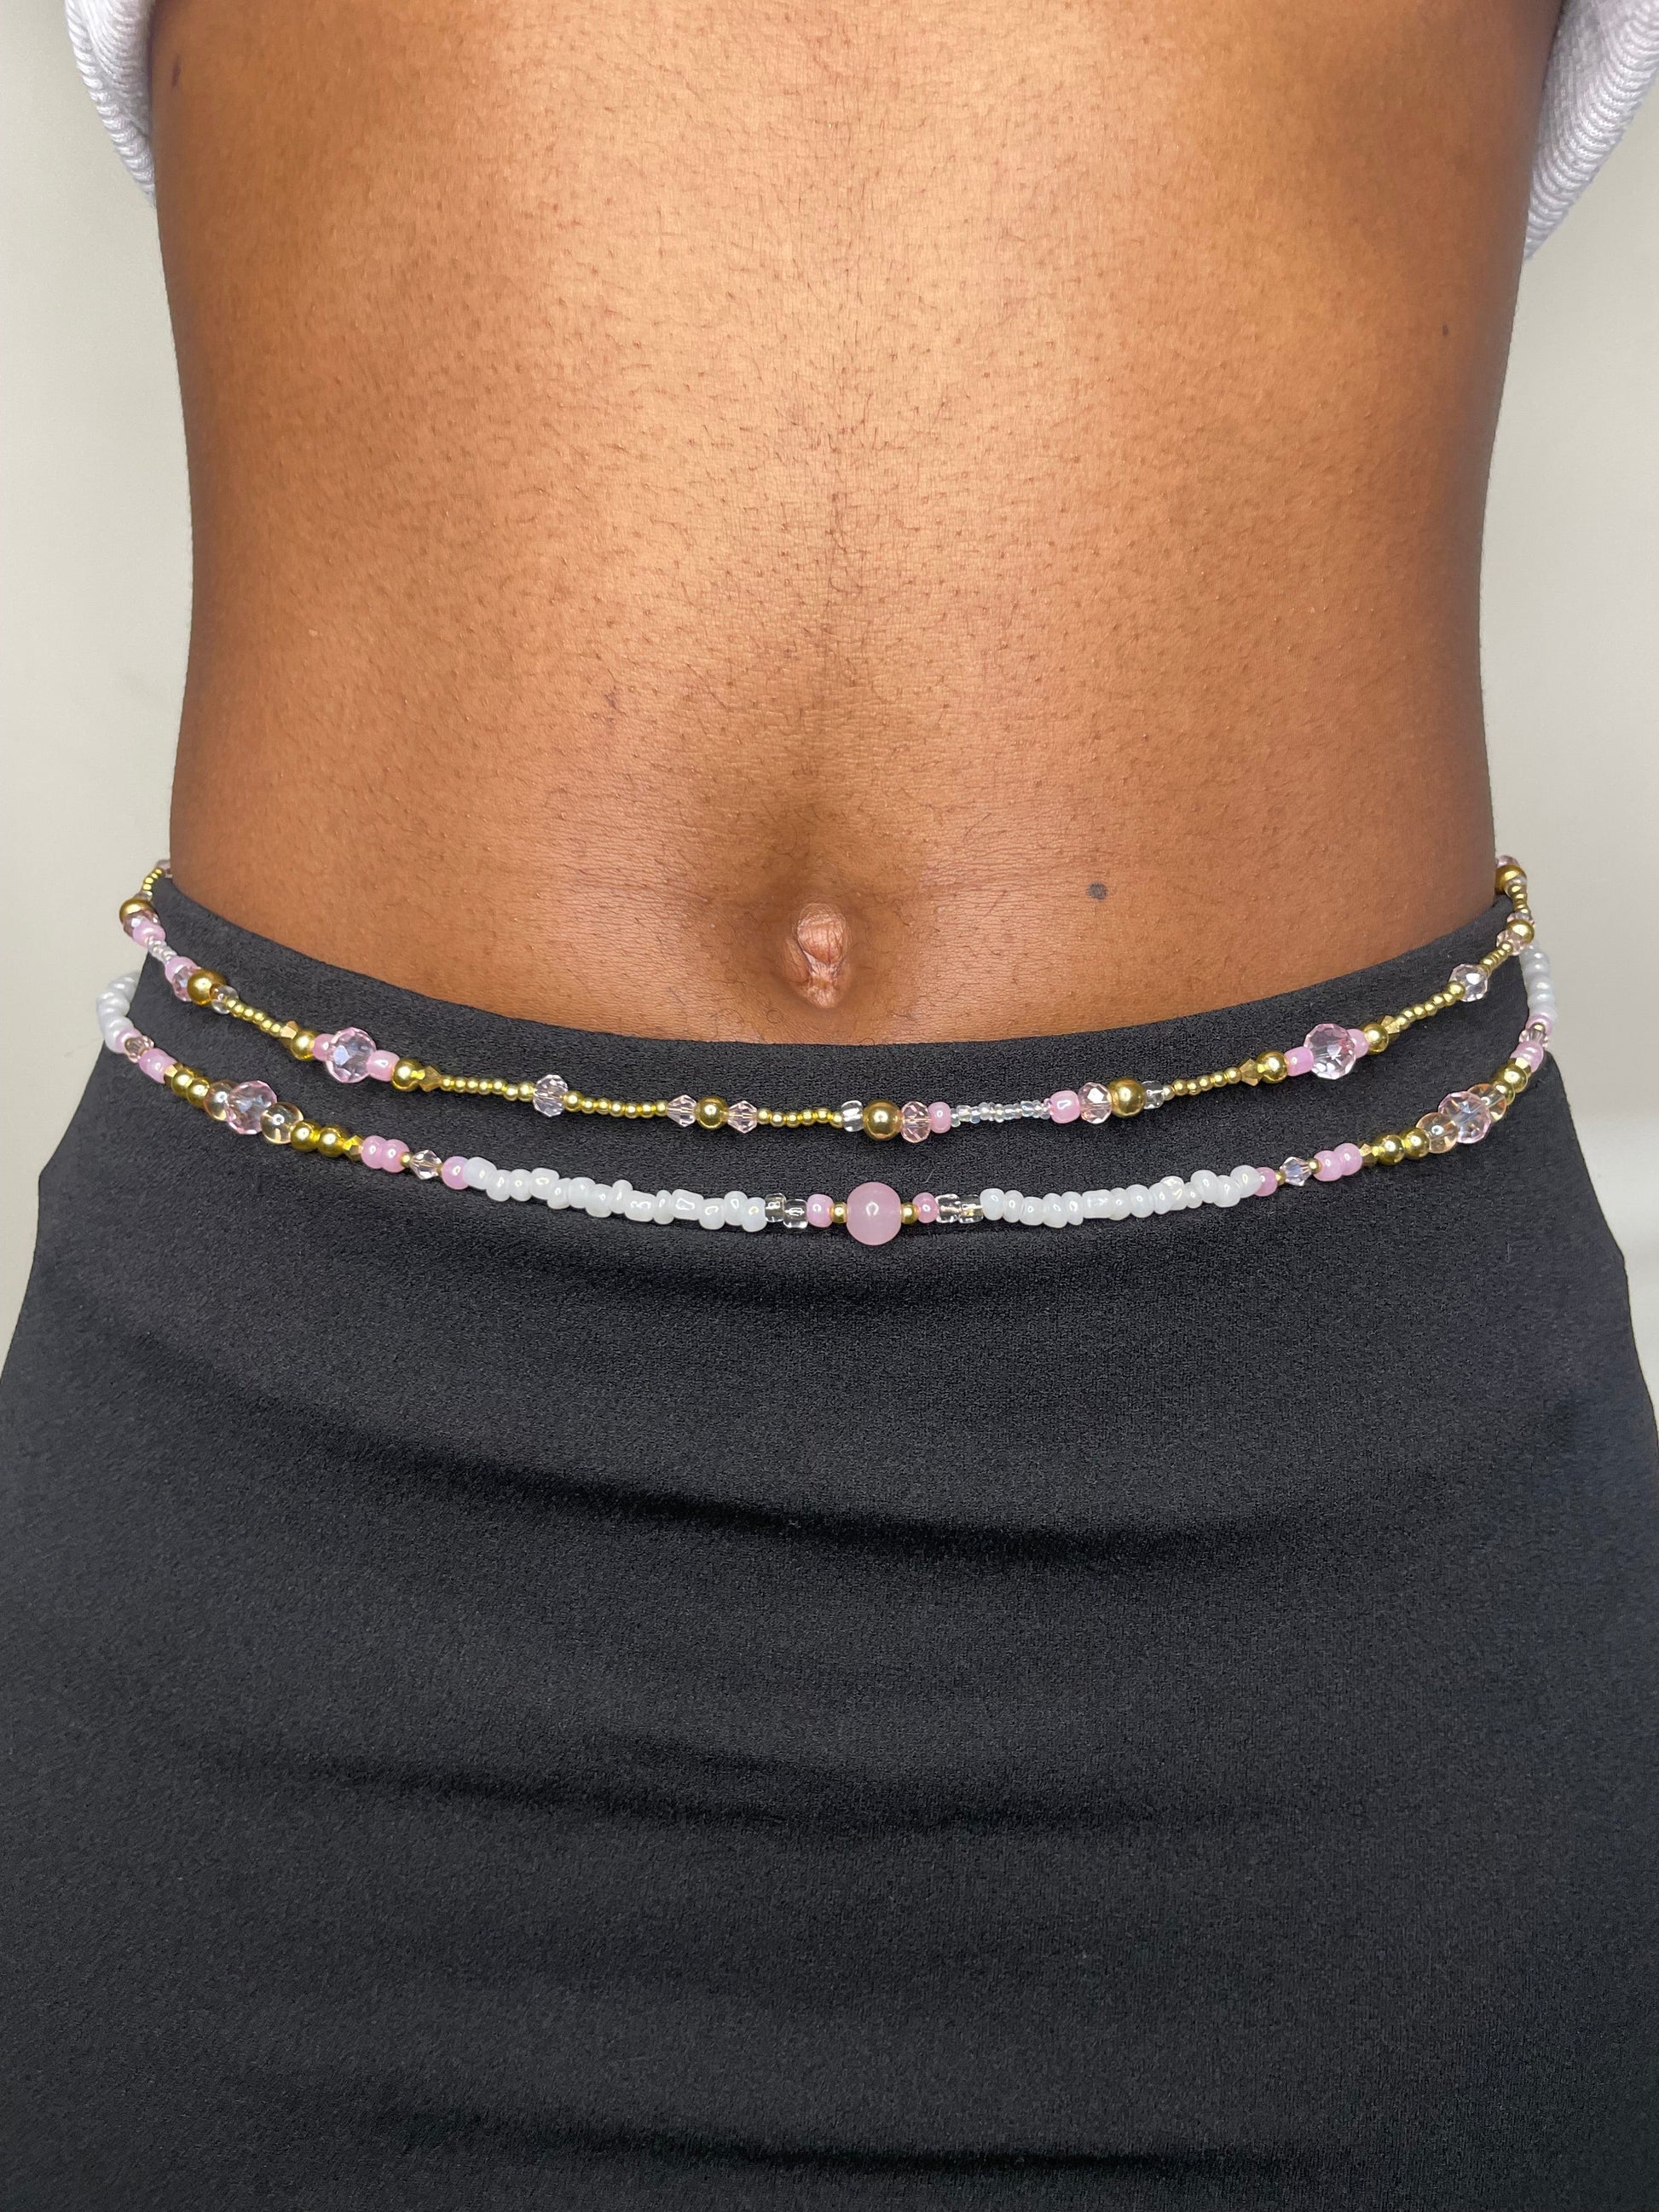 Beaded Belly Chain - Pink & Gold